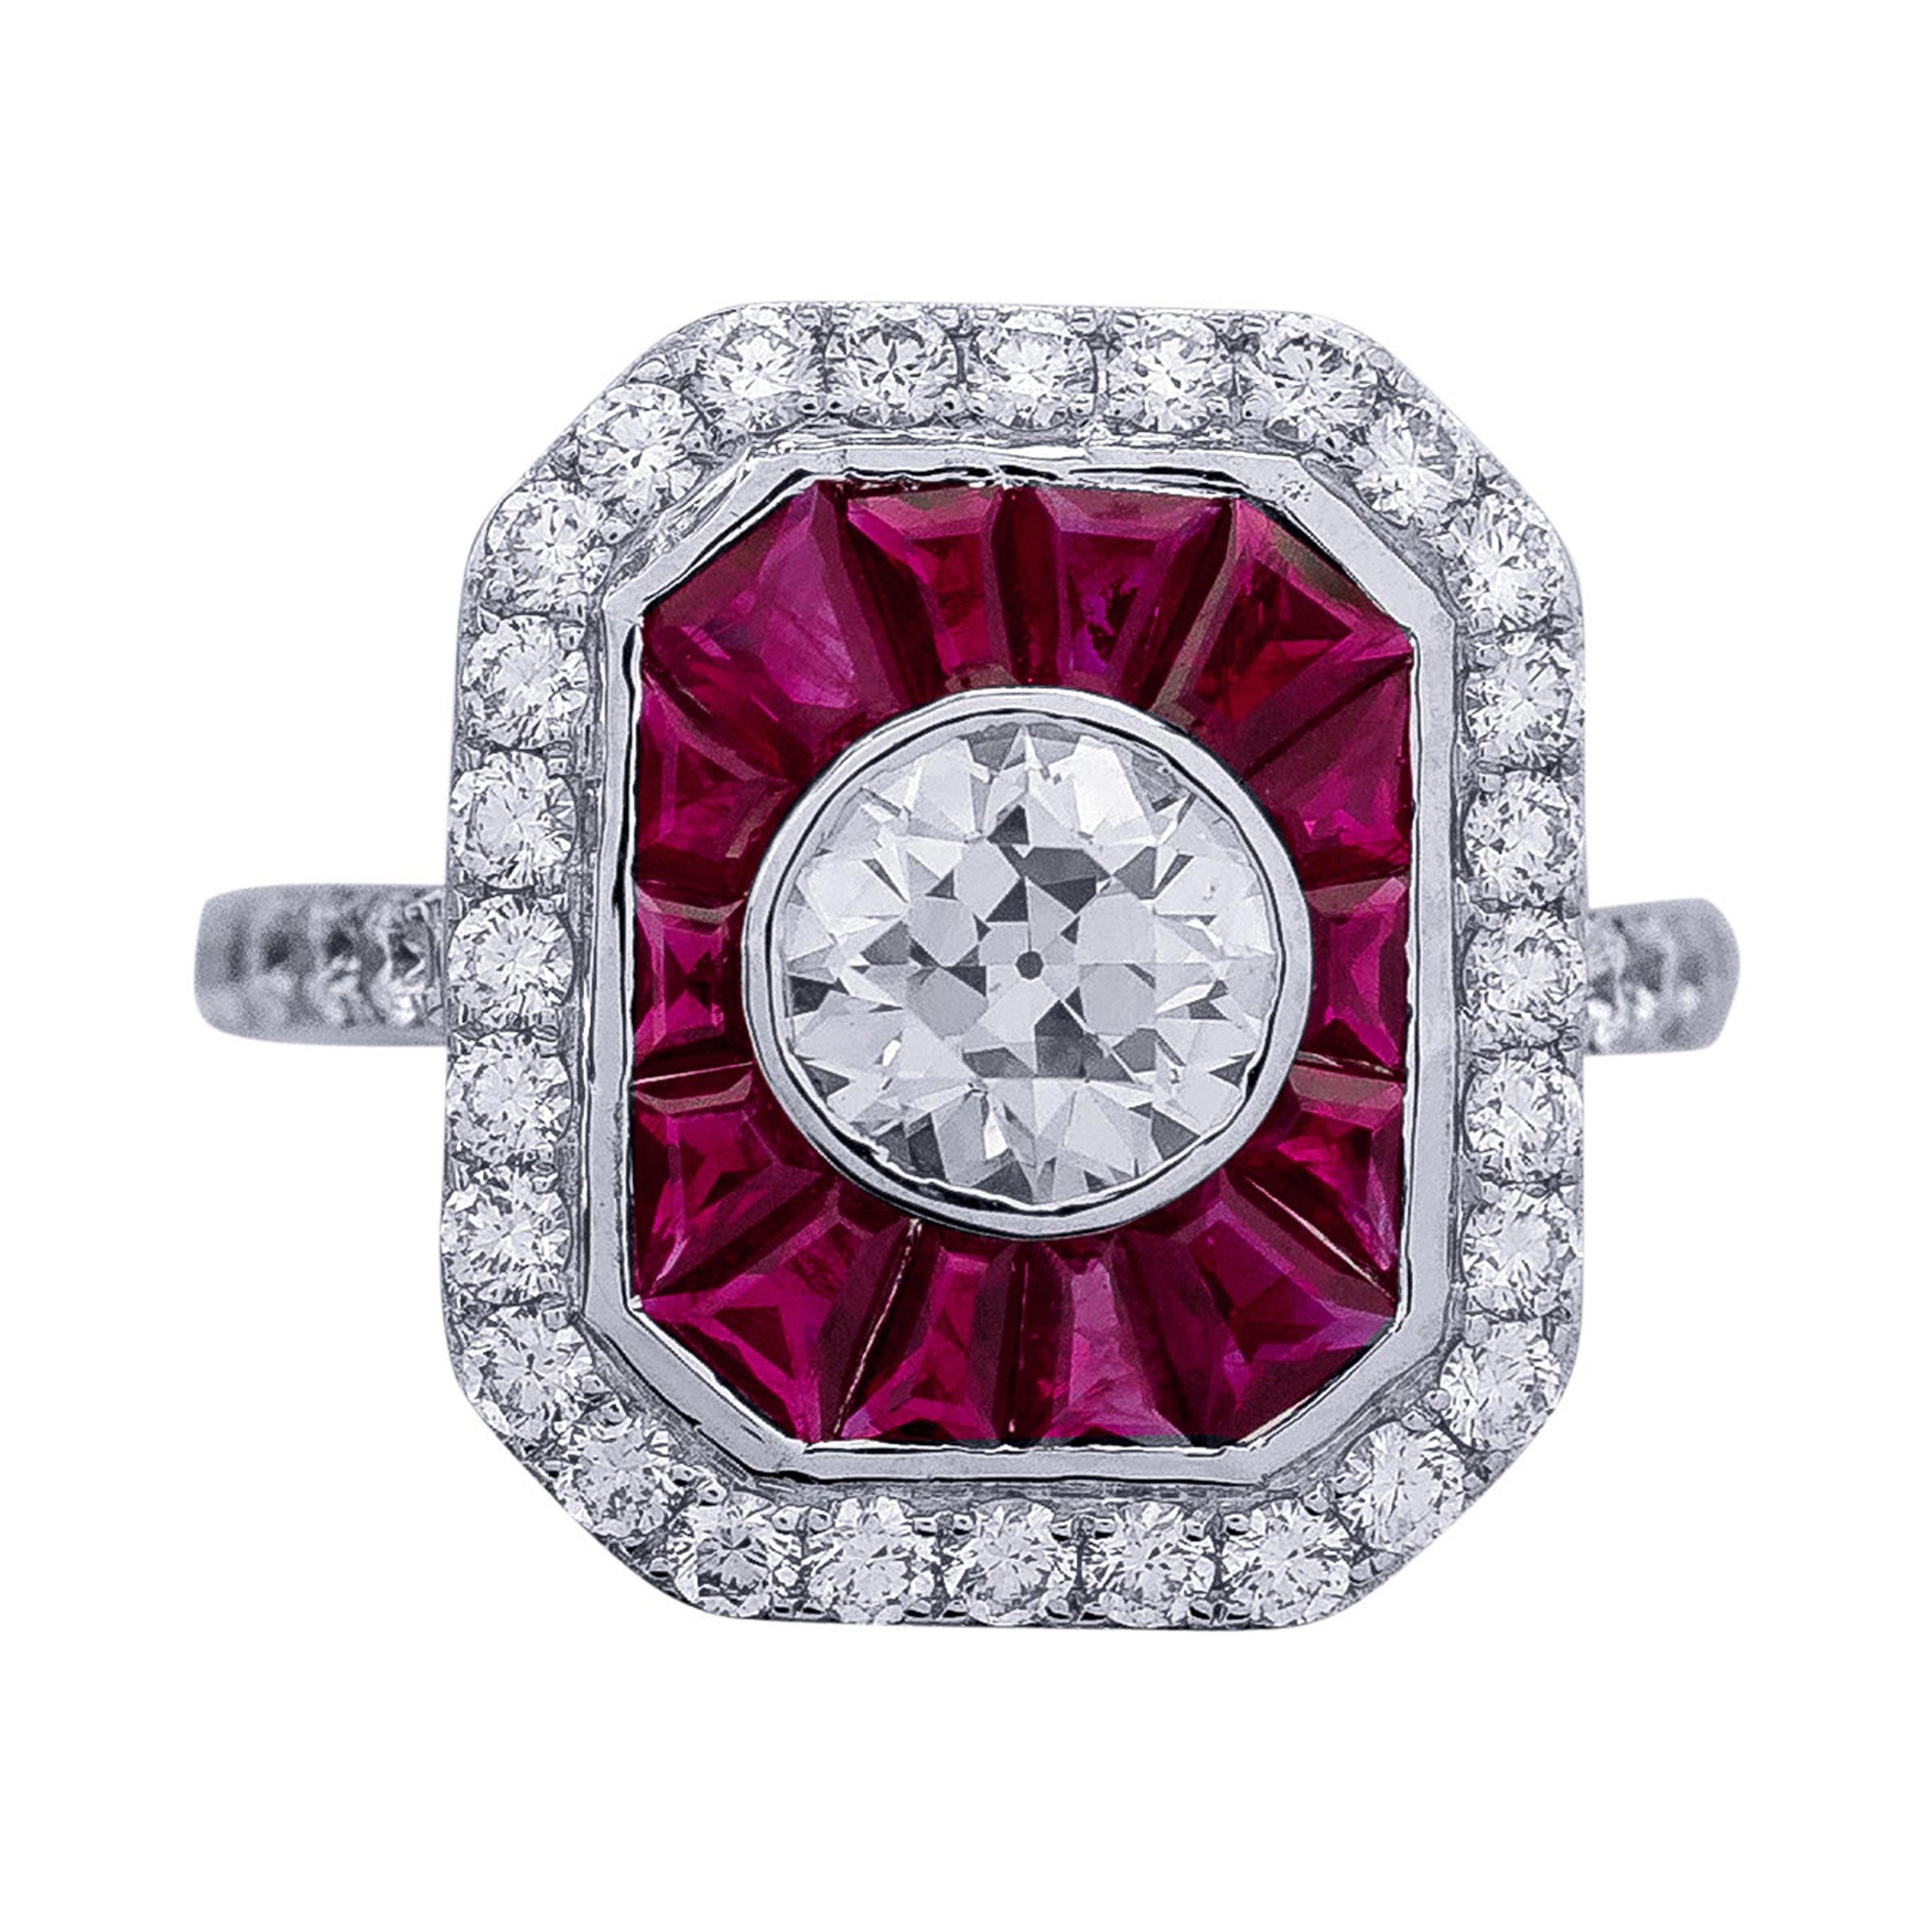 1.05 Carat Old European Cut Diamond with Ruby Statement Ring in 18 Karat Gold For Sale